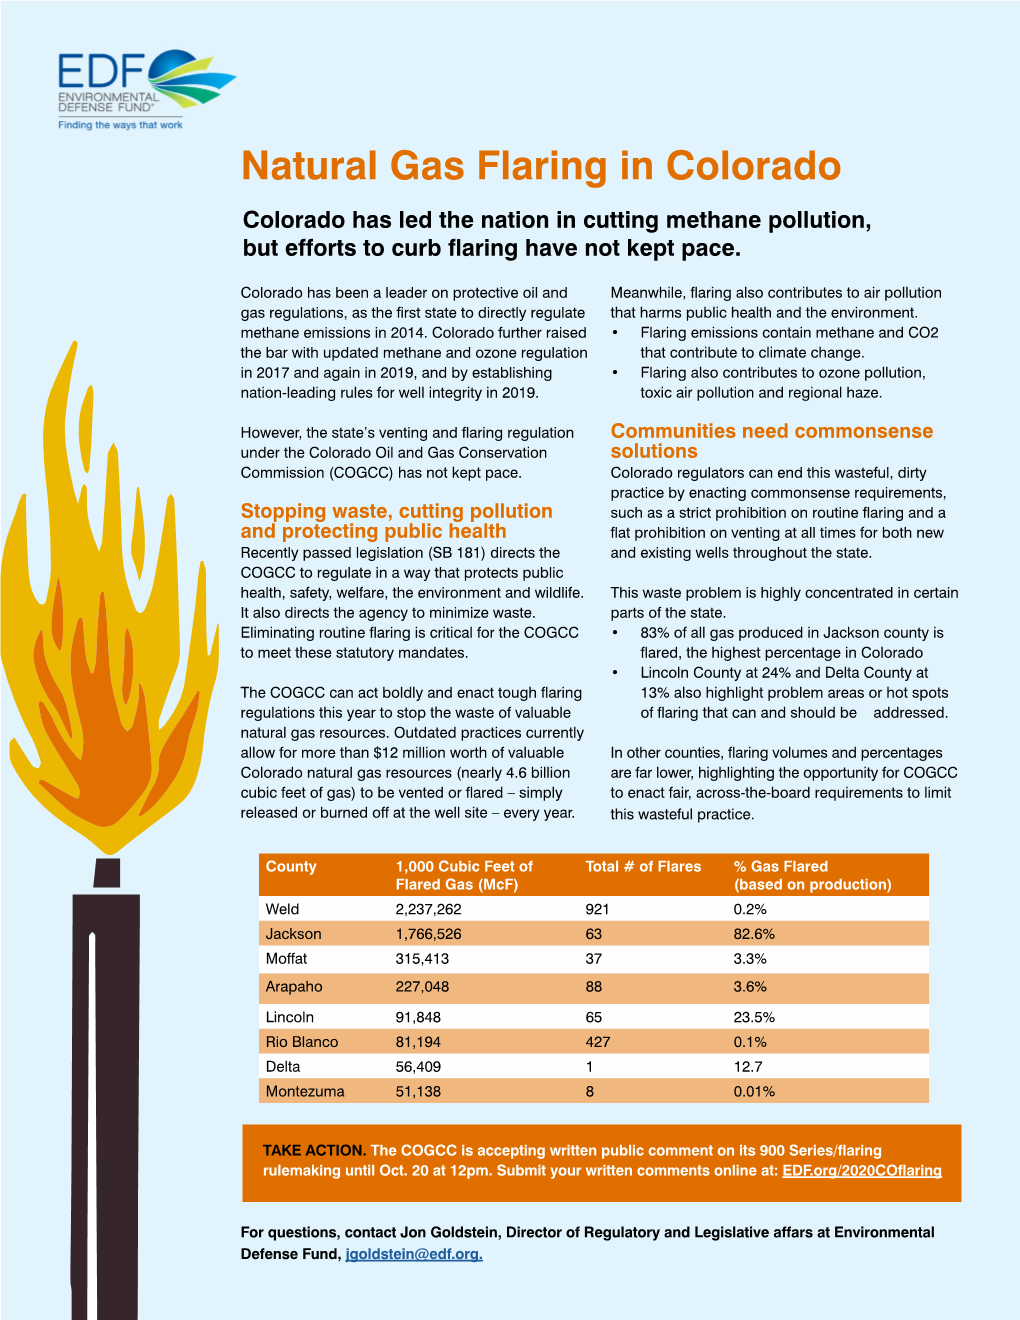 Natural Gas Flaring in Colorado Colorado Has Led the Nation in Cutting Methane Pollution, but Efforts to Curb Flaring Have Not Kept Pace